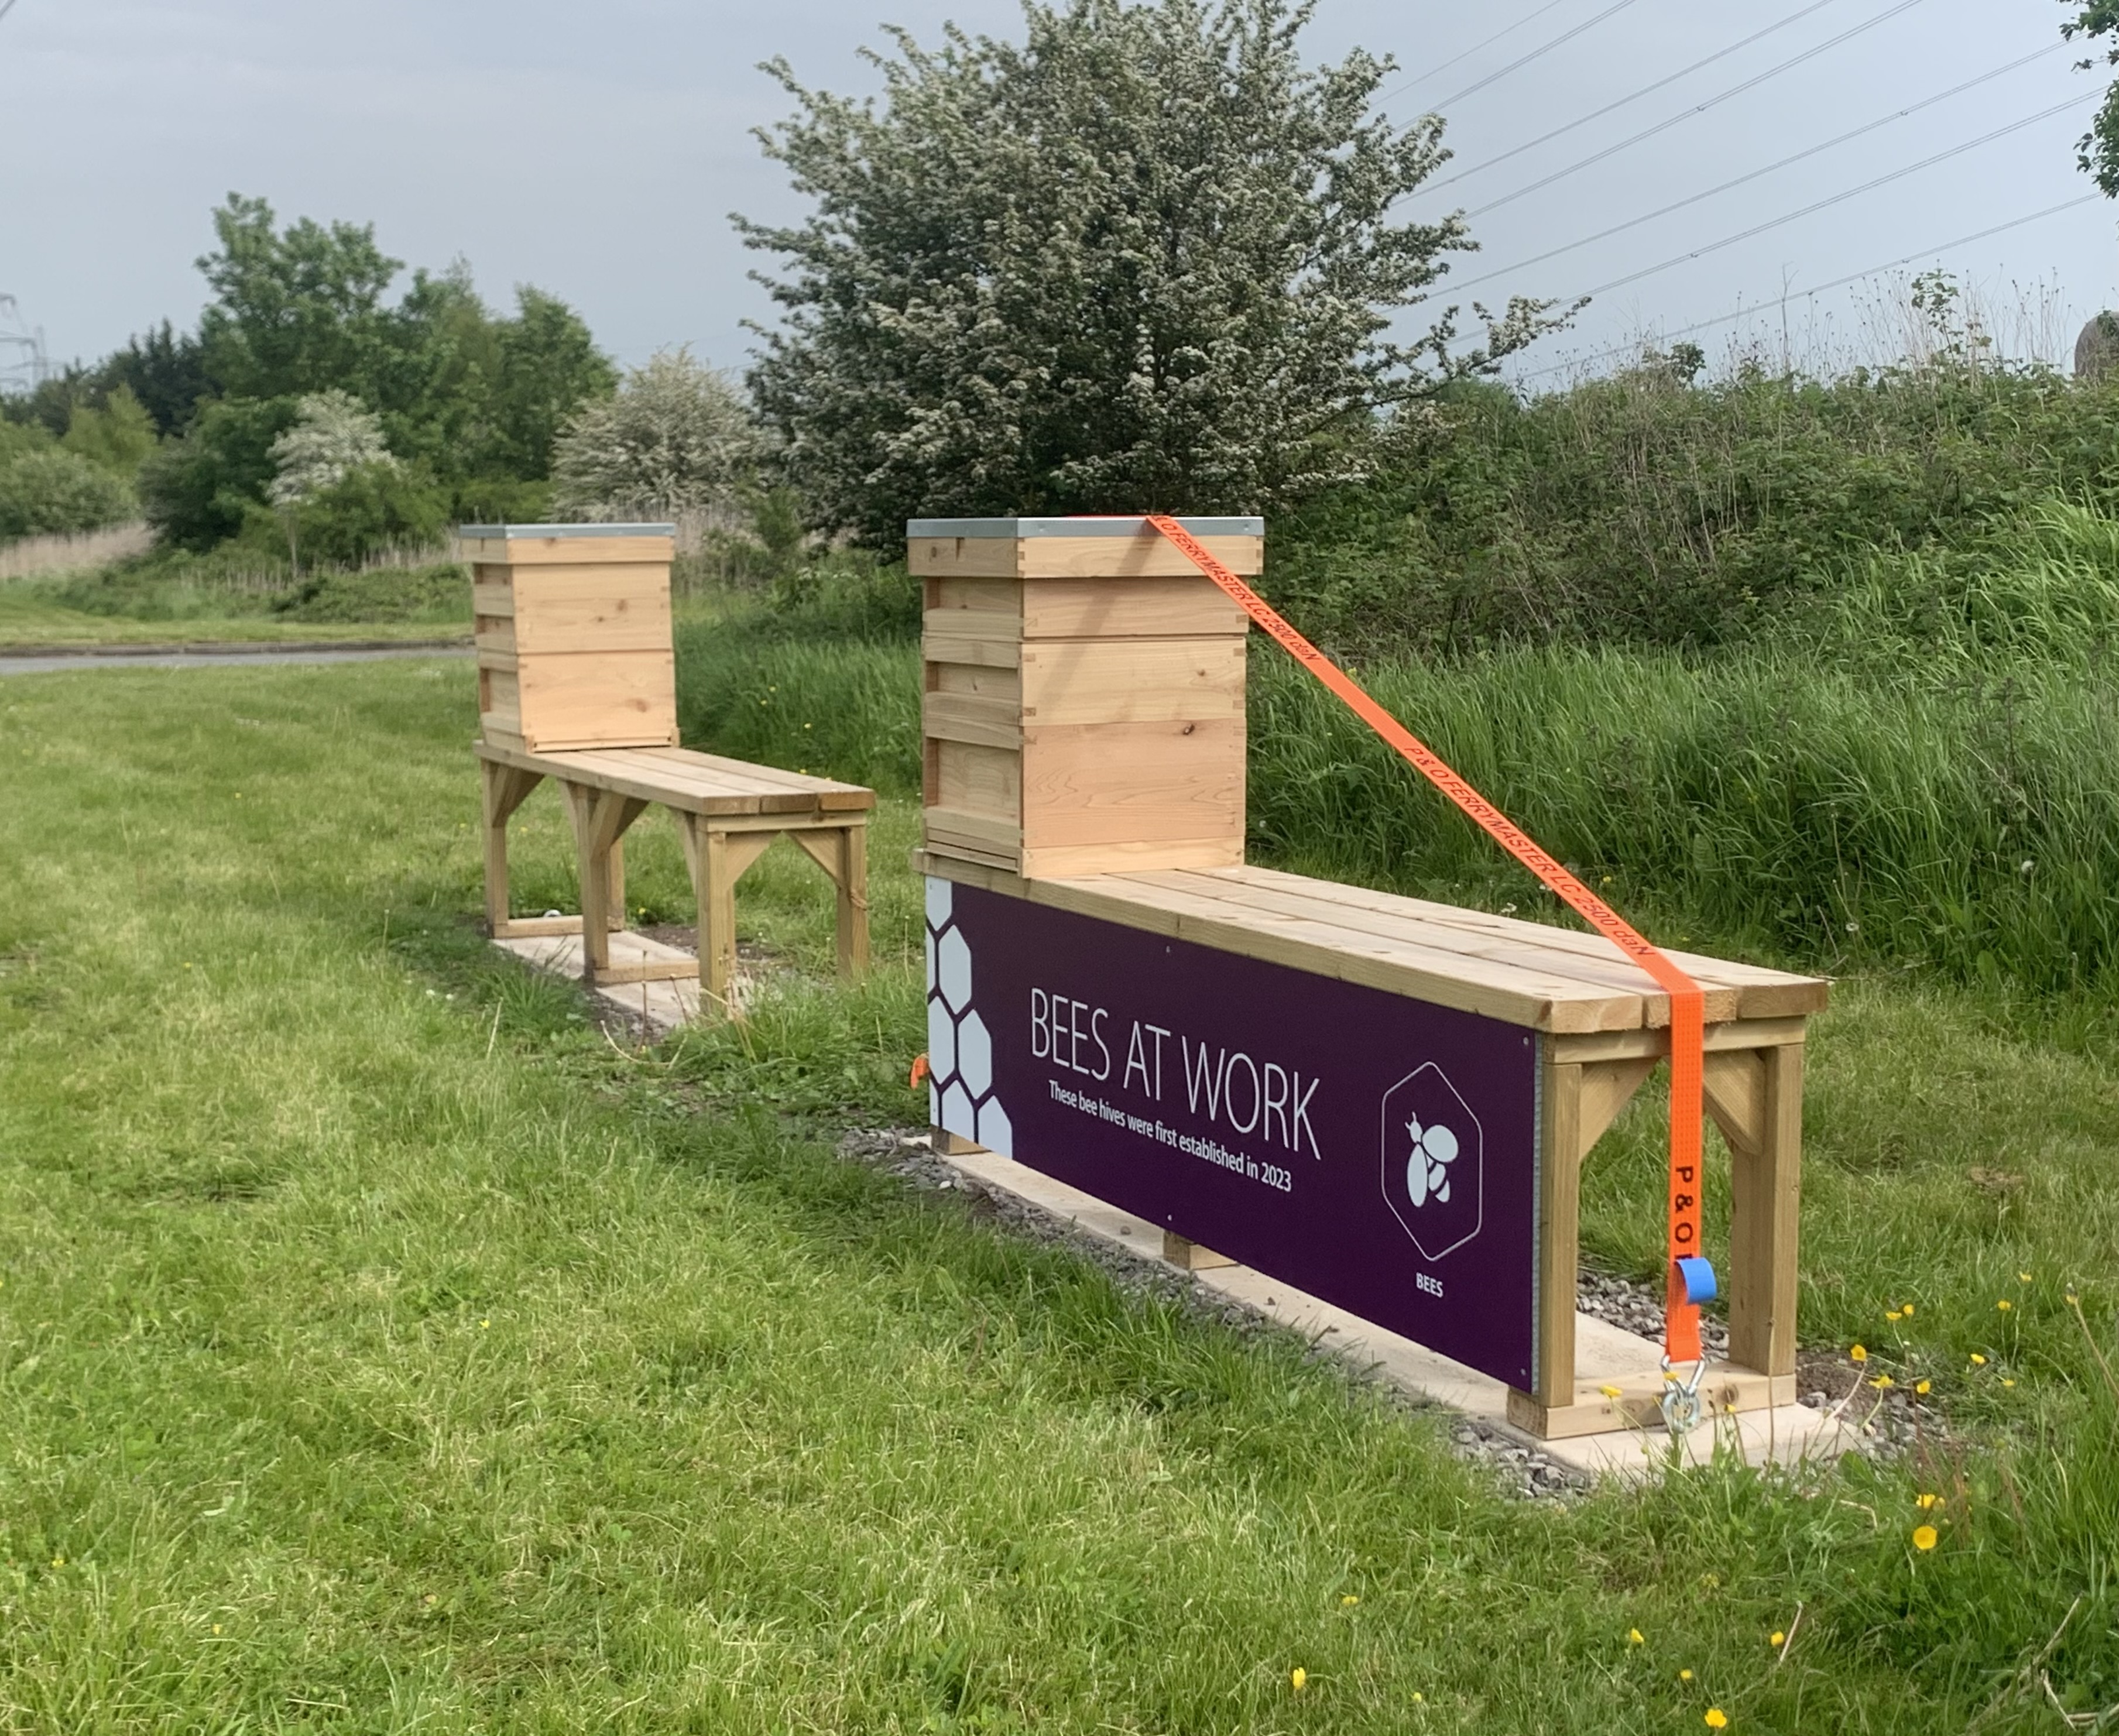 Bees at work in Shotton